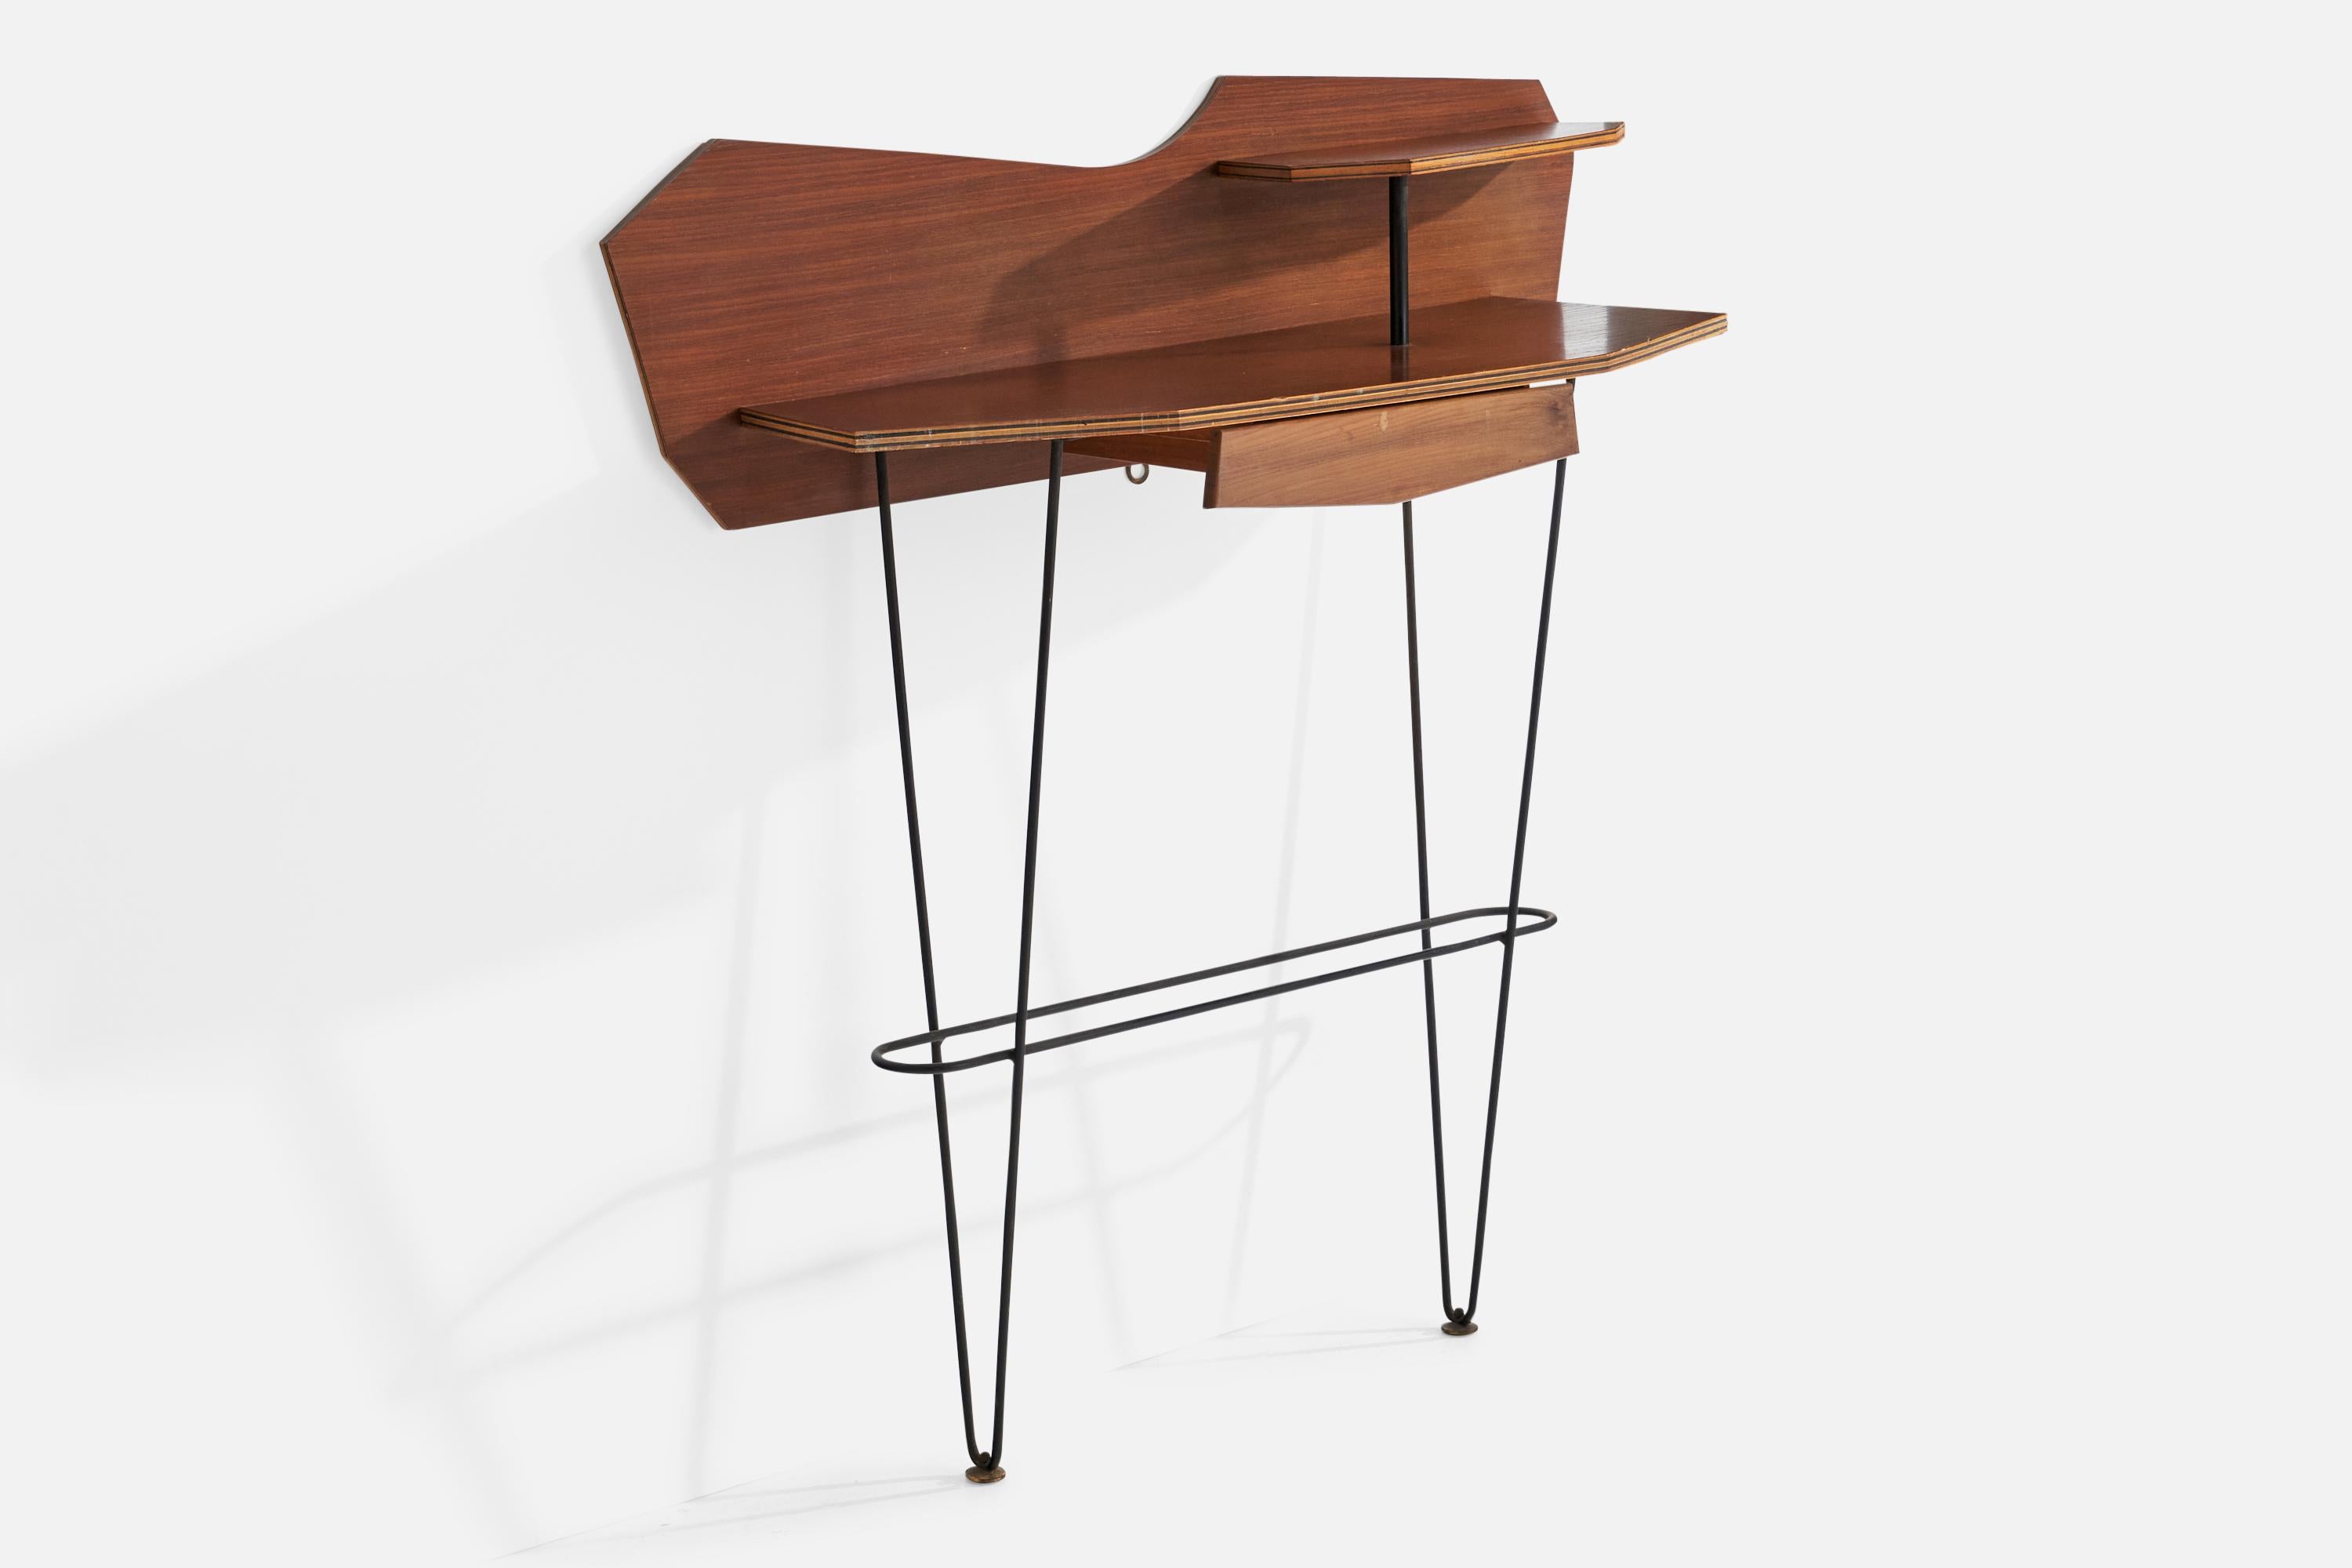 A walnut and black-painted metal console designed and produced in Italy, 1950s.